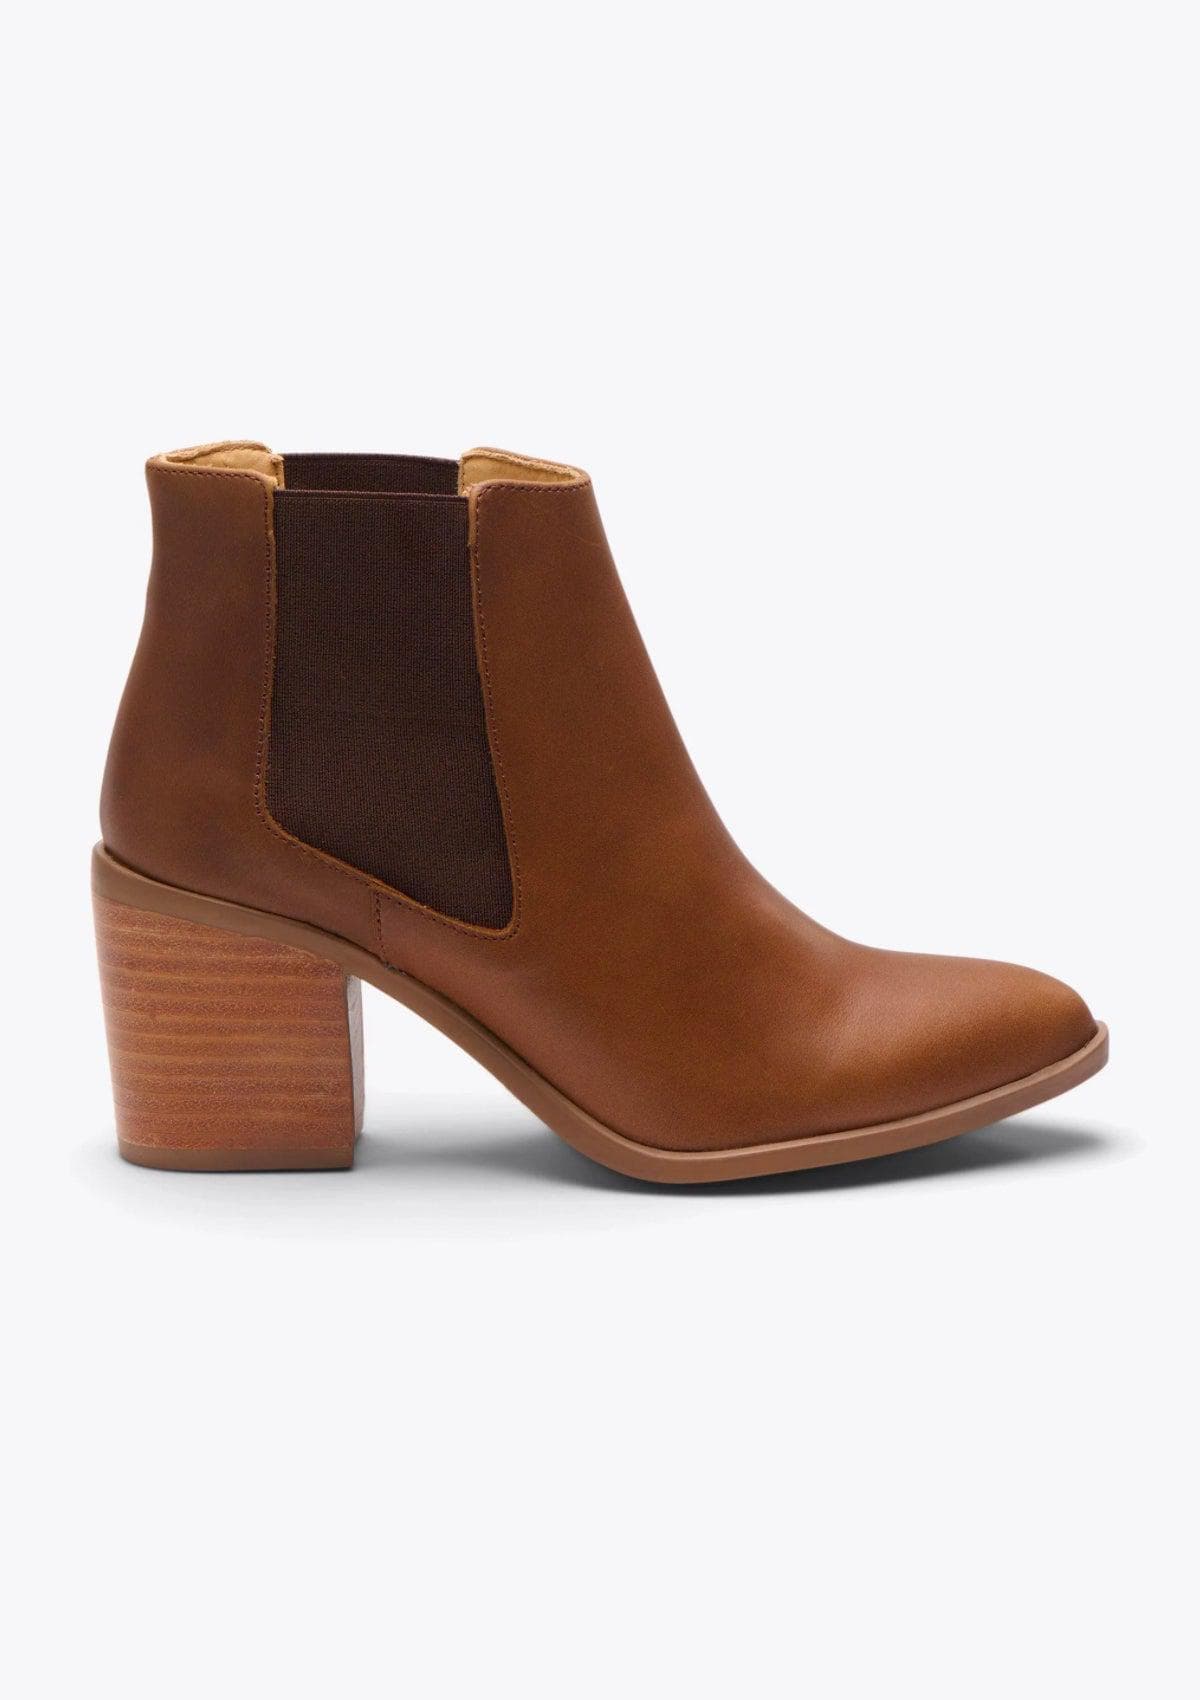 Nisolo Heeled Chelsea Commuter Boot - Commuter Brown